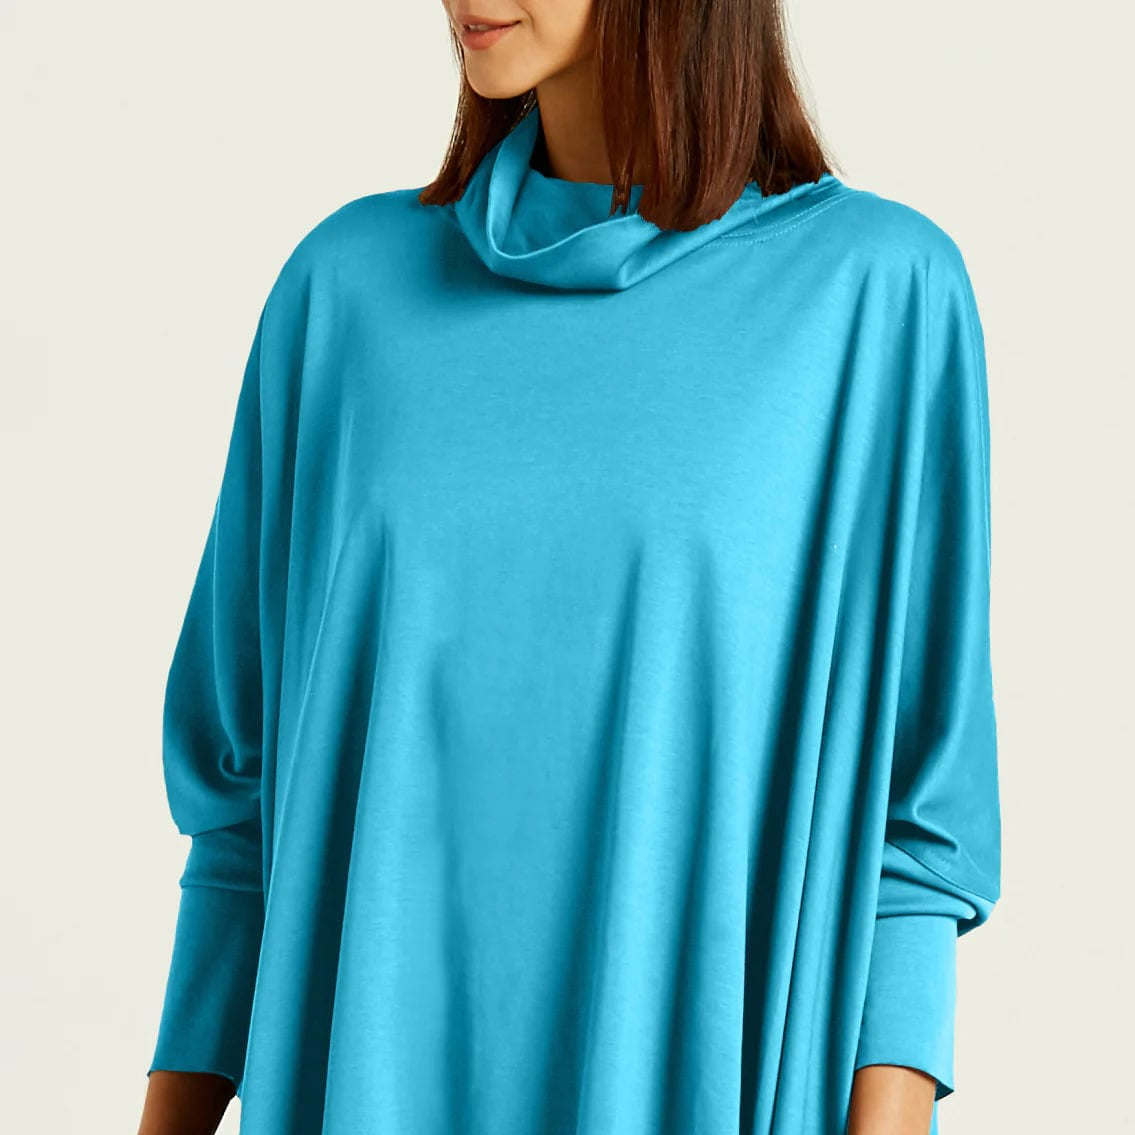 Planet by Lauren G Women's Shirts & Tops Turquoise / One Size Planet Swing Turtleneck Tee